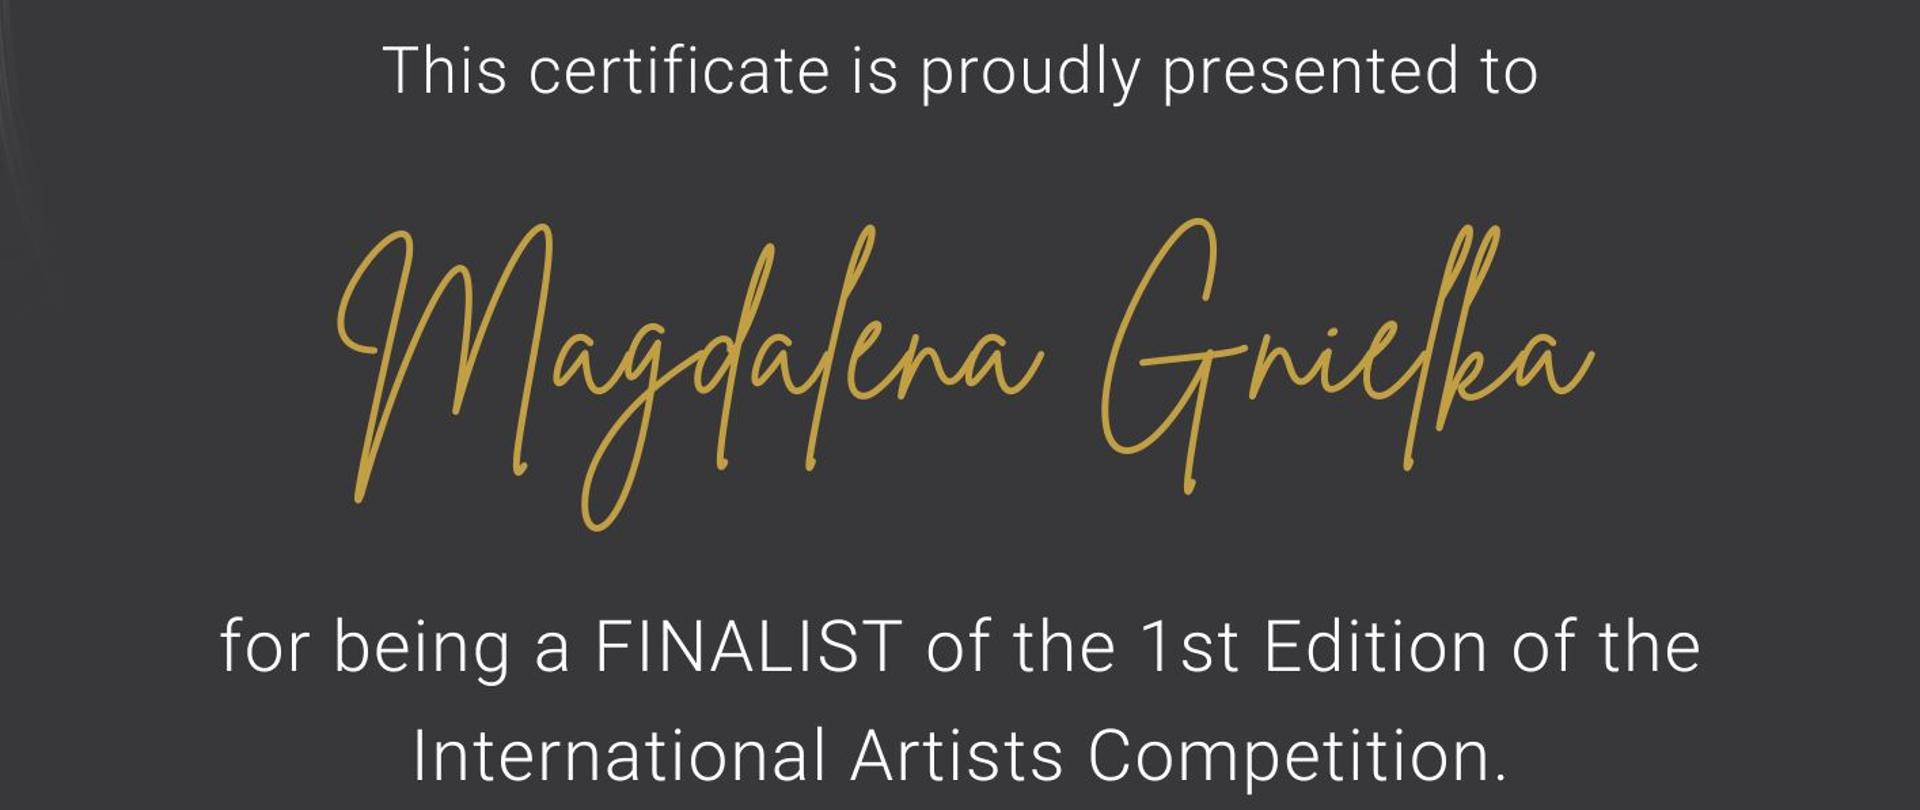 Grafika - dyplom finalisty. Tło ciemnoszare. Napisy: International Artists Competition CERTIFICATE OF PARTICIPATION This certificate is proudly presented to MAGDALENA GNIELKA for being a FINALIST of the 1st edition of the International Artists Competition. 30.04.2023 FREIE KUNST.